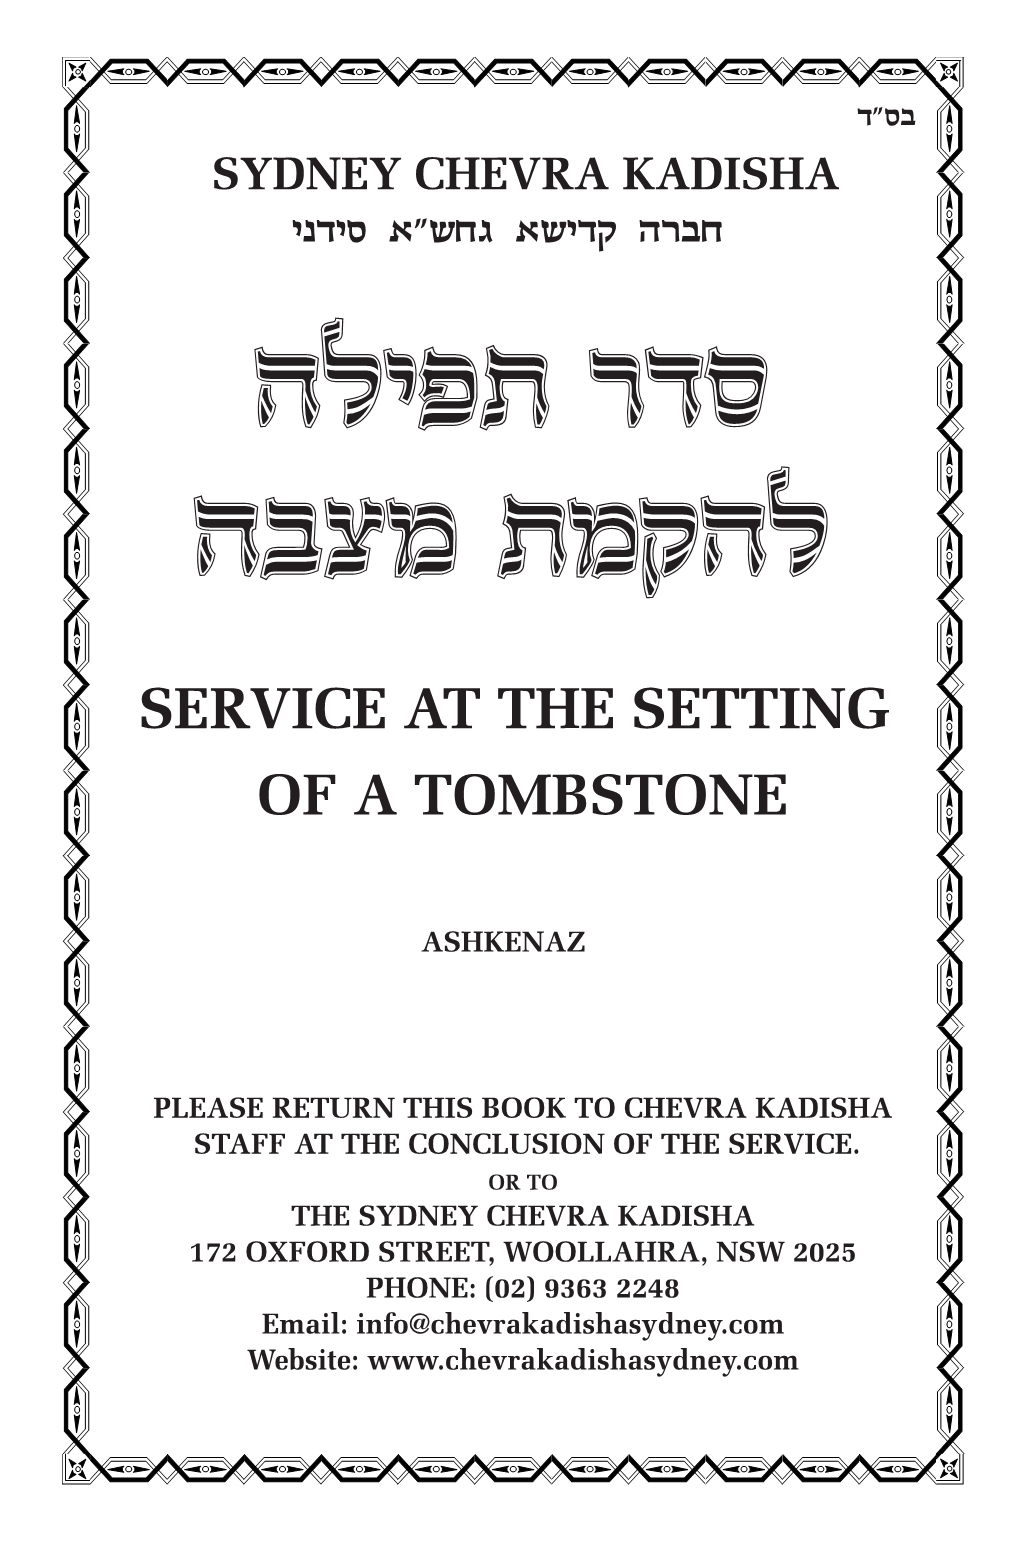 Consecration of a Tombstone Service